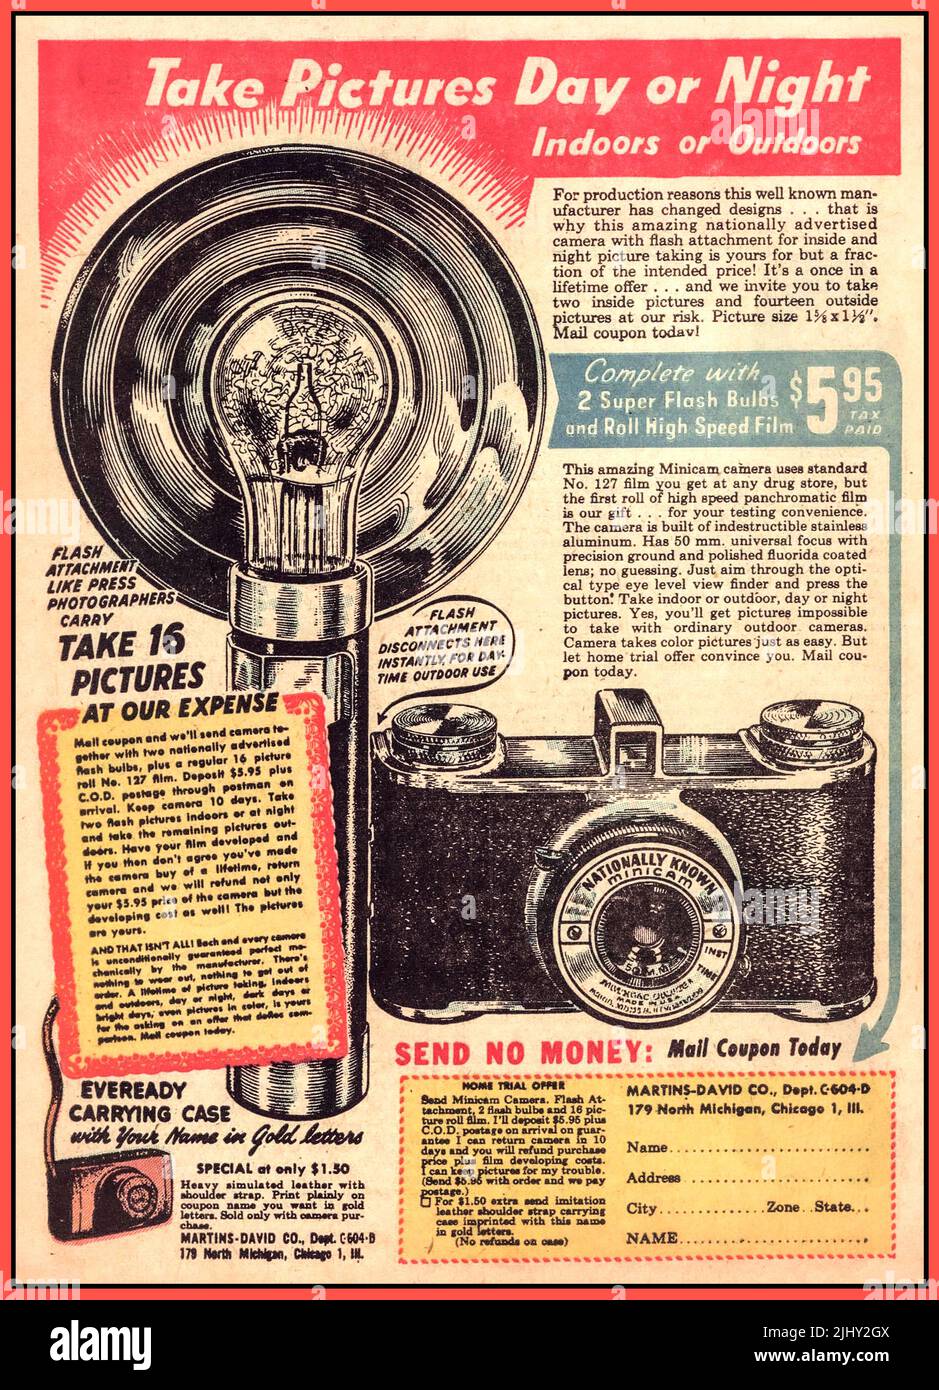 1940s Film Camera and Flash Bulb magazine advertisement 'Take Pictures Day or Night'  The Minicam Camera with Film and Processing included 1949 Post War America USA Fashion Style and Technology of the 1940s Stock Photo